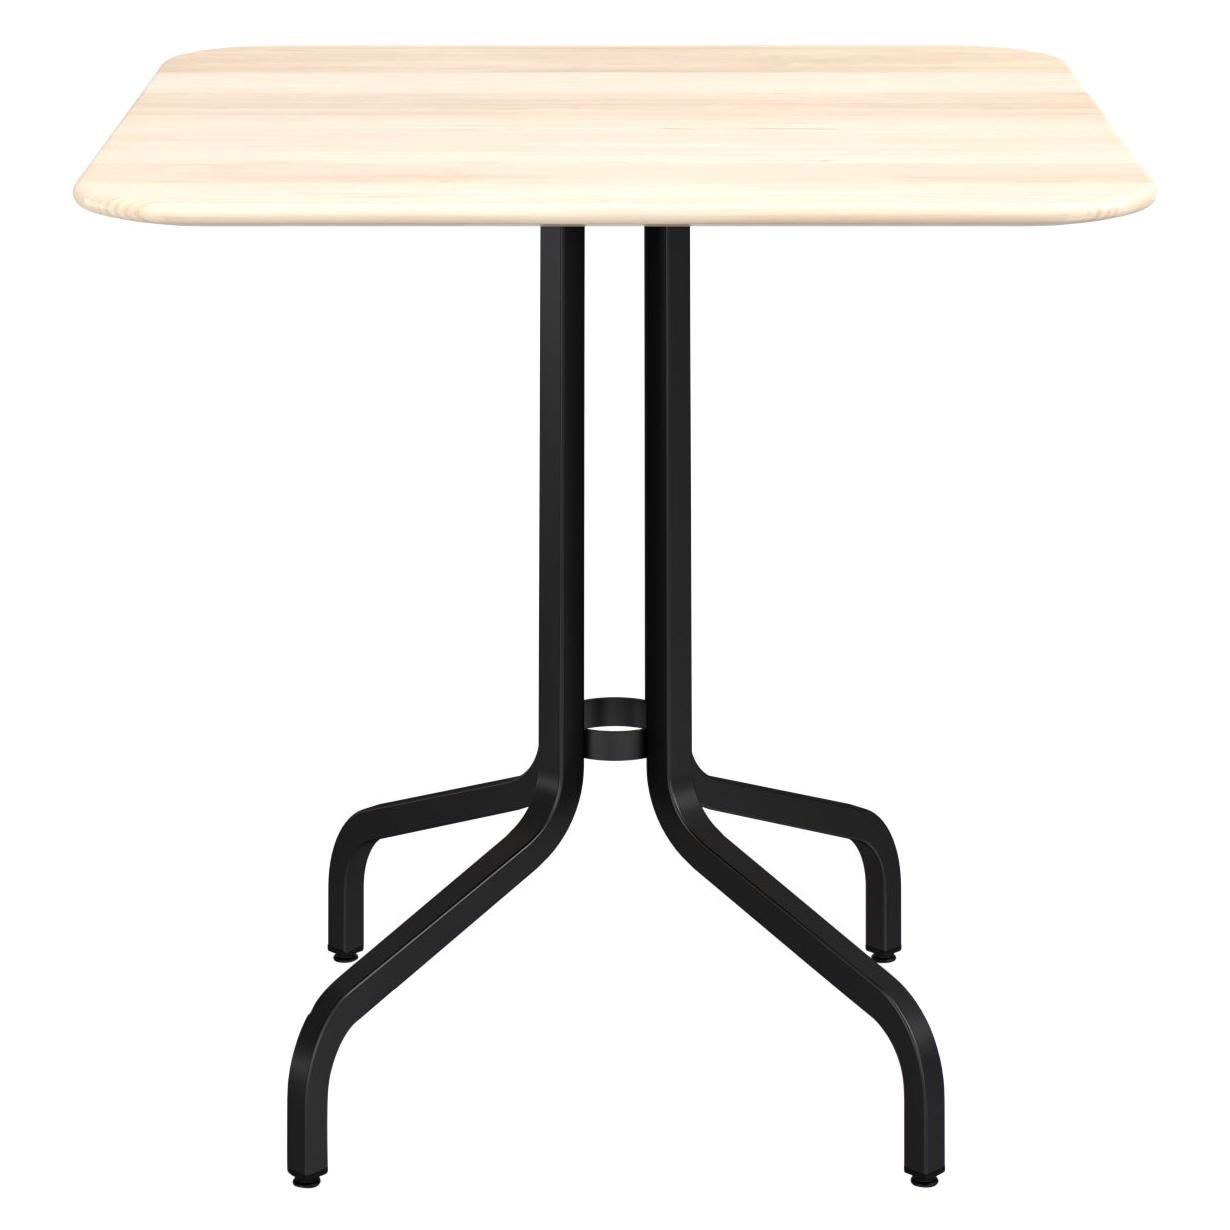 Emeco 1 Inch Medium Cafe Table with Black Legs & Wood Top by Jasper Morrison